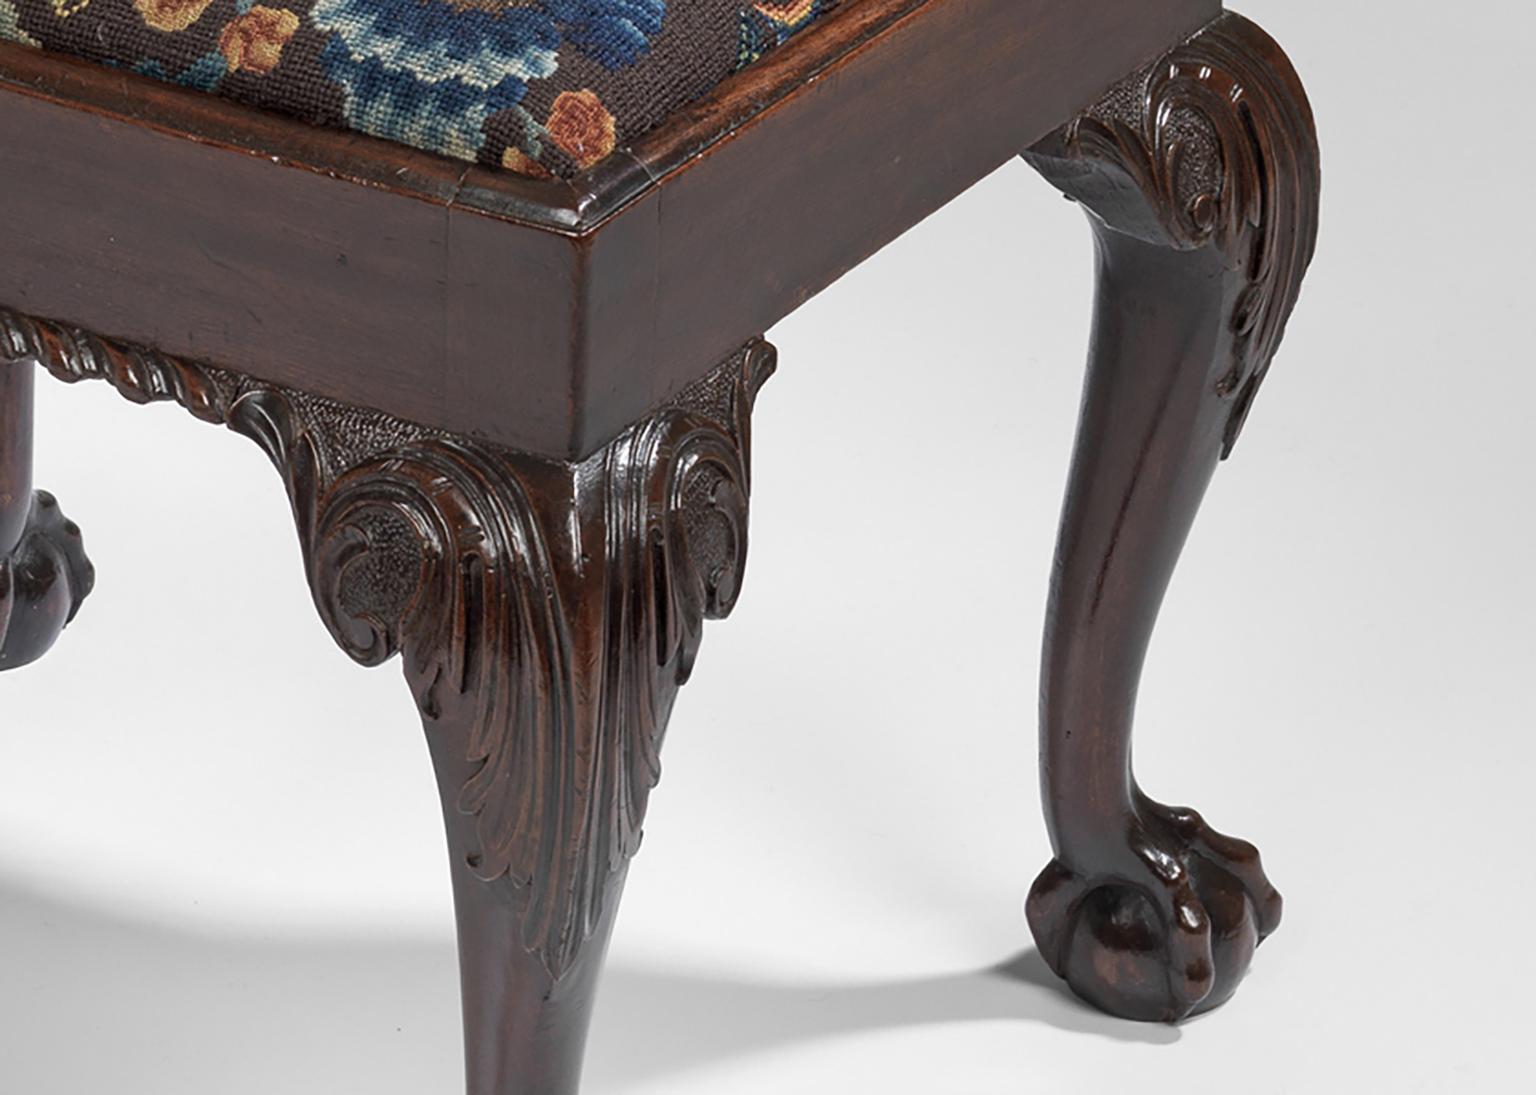 Upholstered with associated 18th century Petit Point & Cross Stitch Needlework.
A single mid-18th century mahogany stool with drop-in frame; a back and front gadrooned edge; upholstered in associated 18th century floral needlework; on cabriole legs